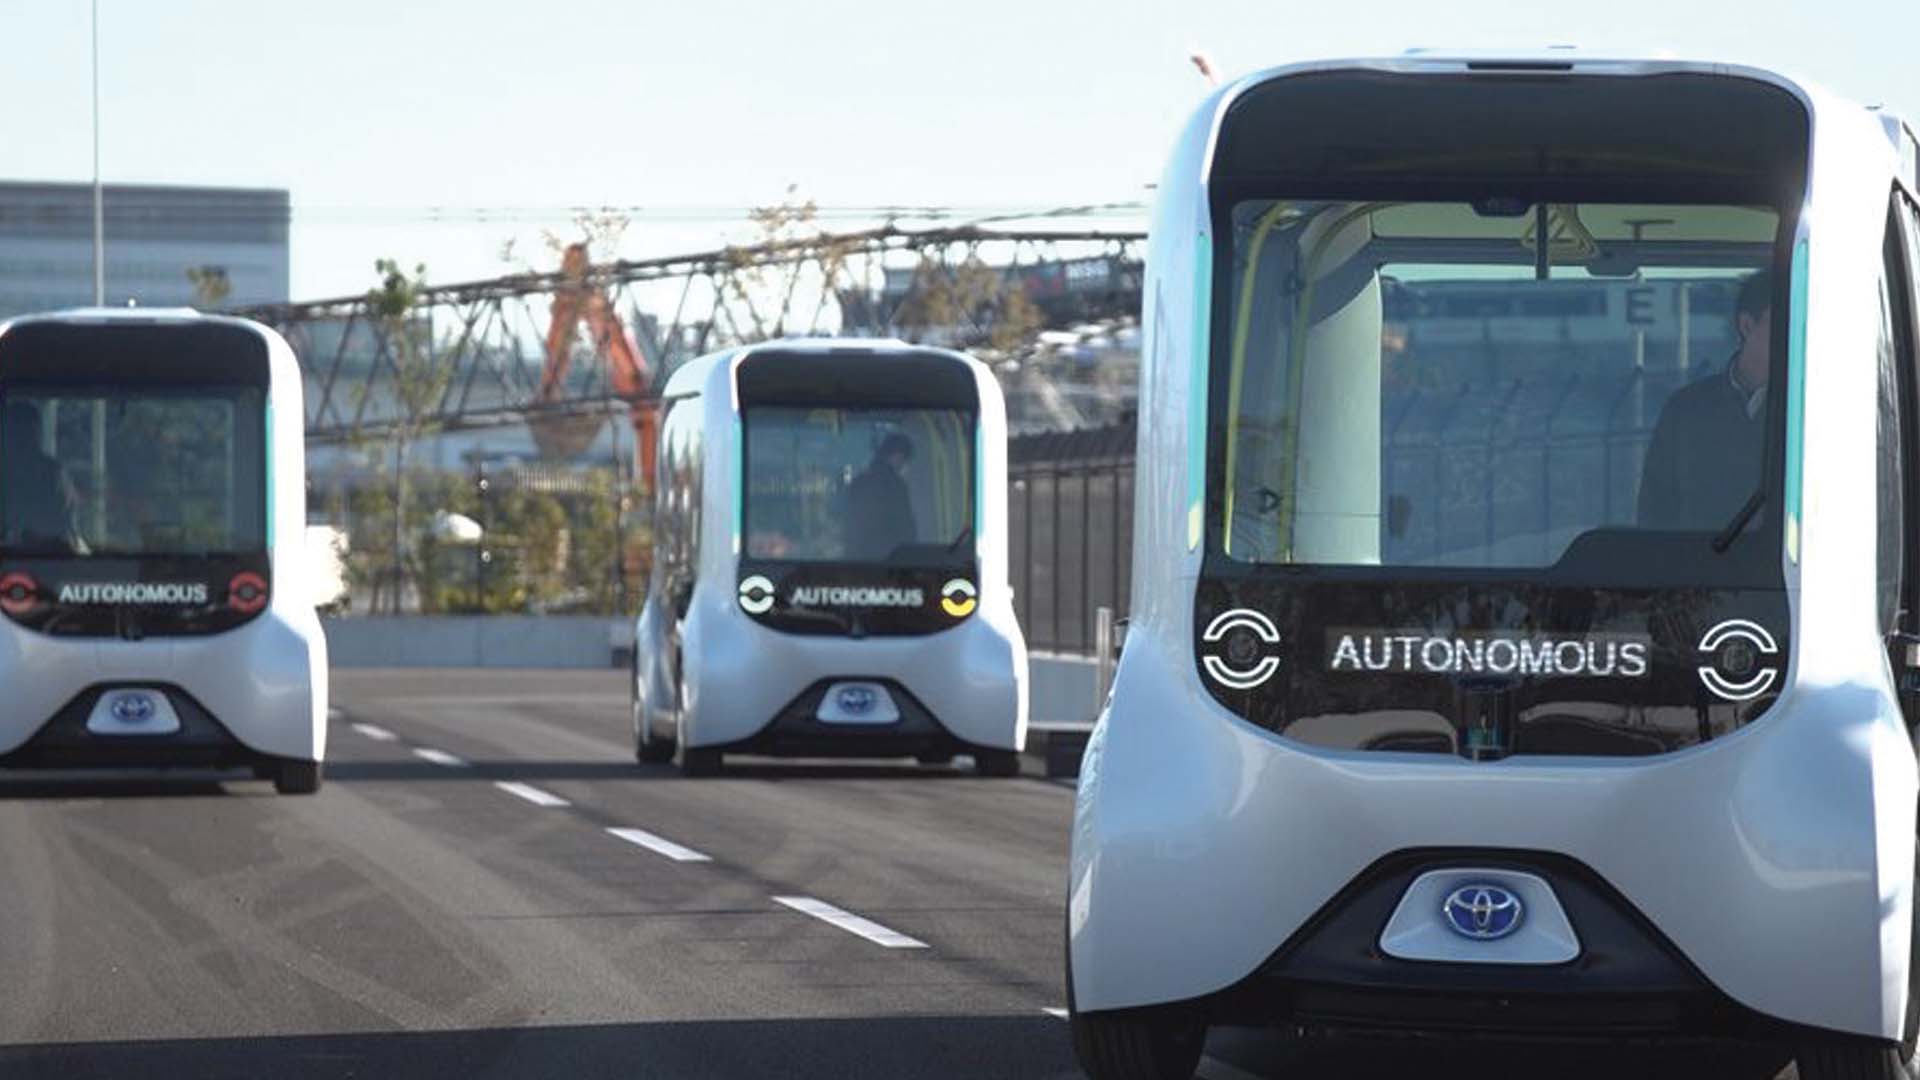 Autonomous vehicles in the 2020 Tokyo Olympic Games